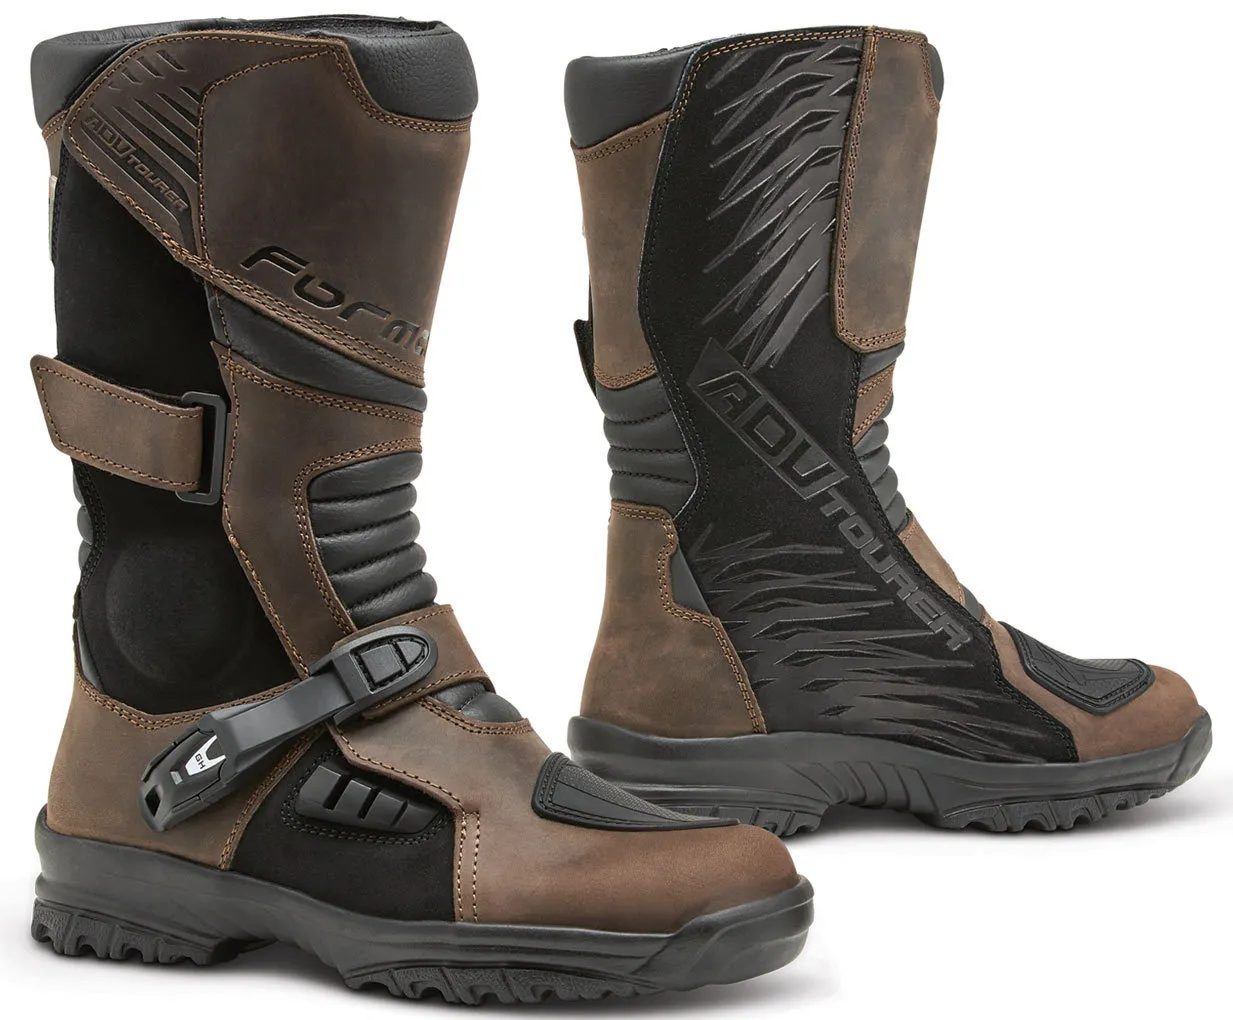 Forma ADV Tourer Dry Brown Riding Boots|Custom Elements